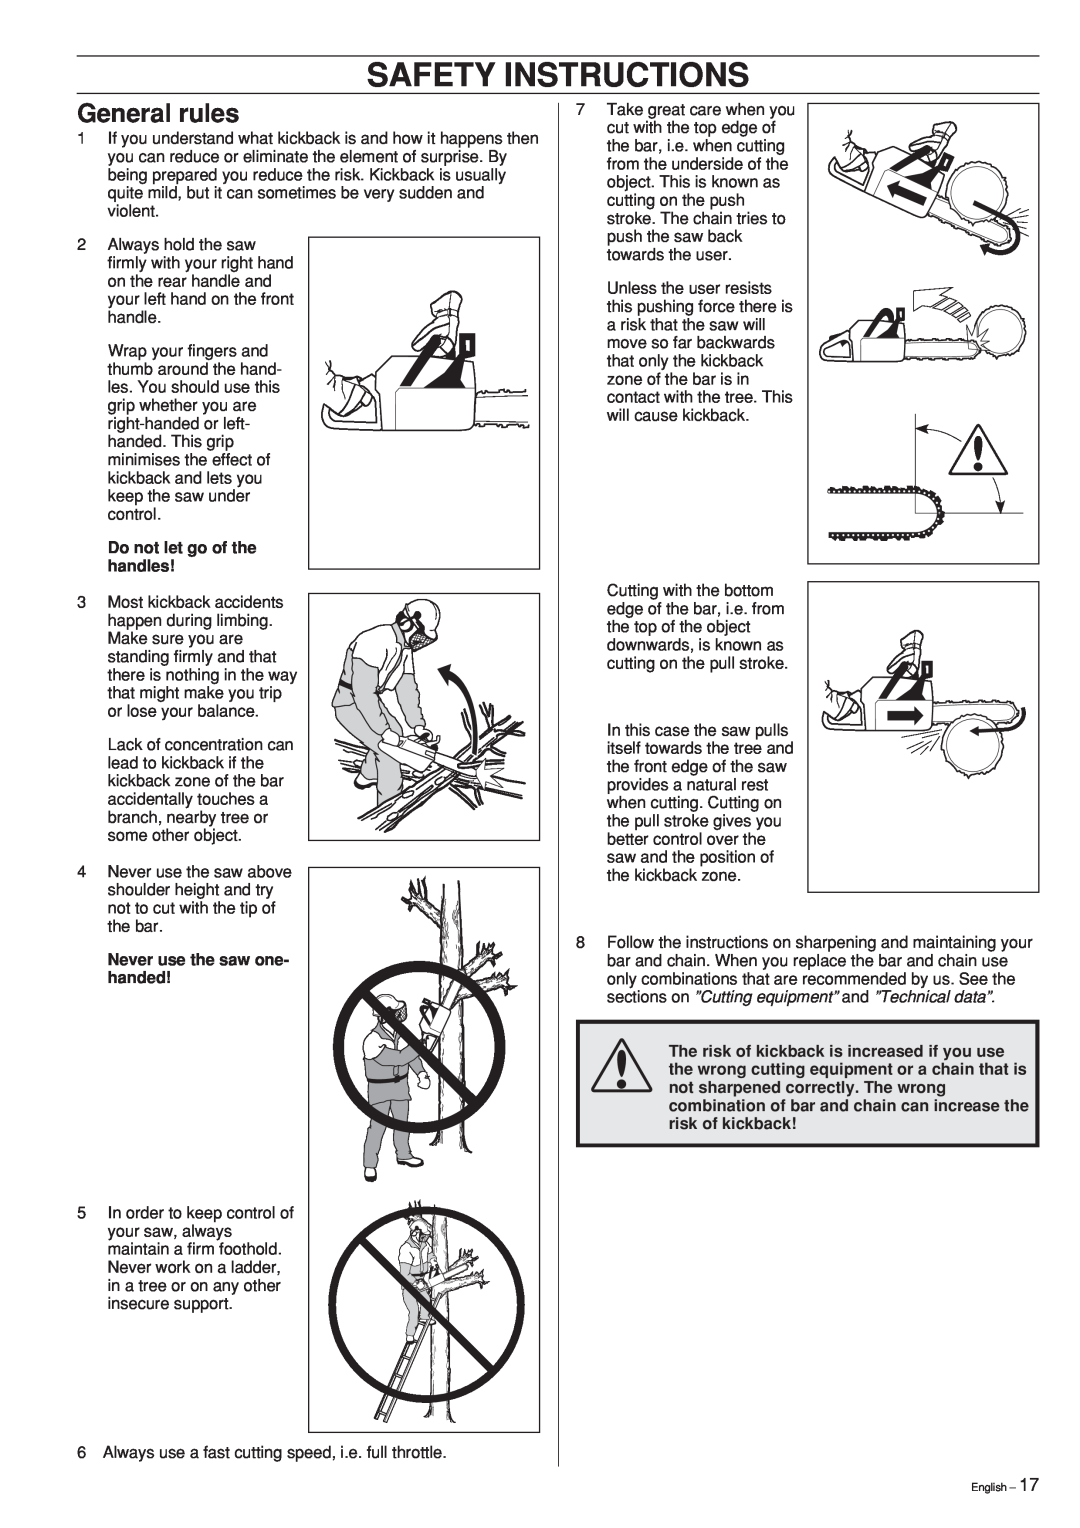 Jonsered CS 2152 manual General rules, Safety Instructions, Do not let go of the handles, Never use the saw one- handed 